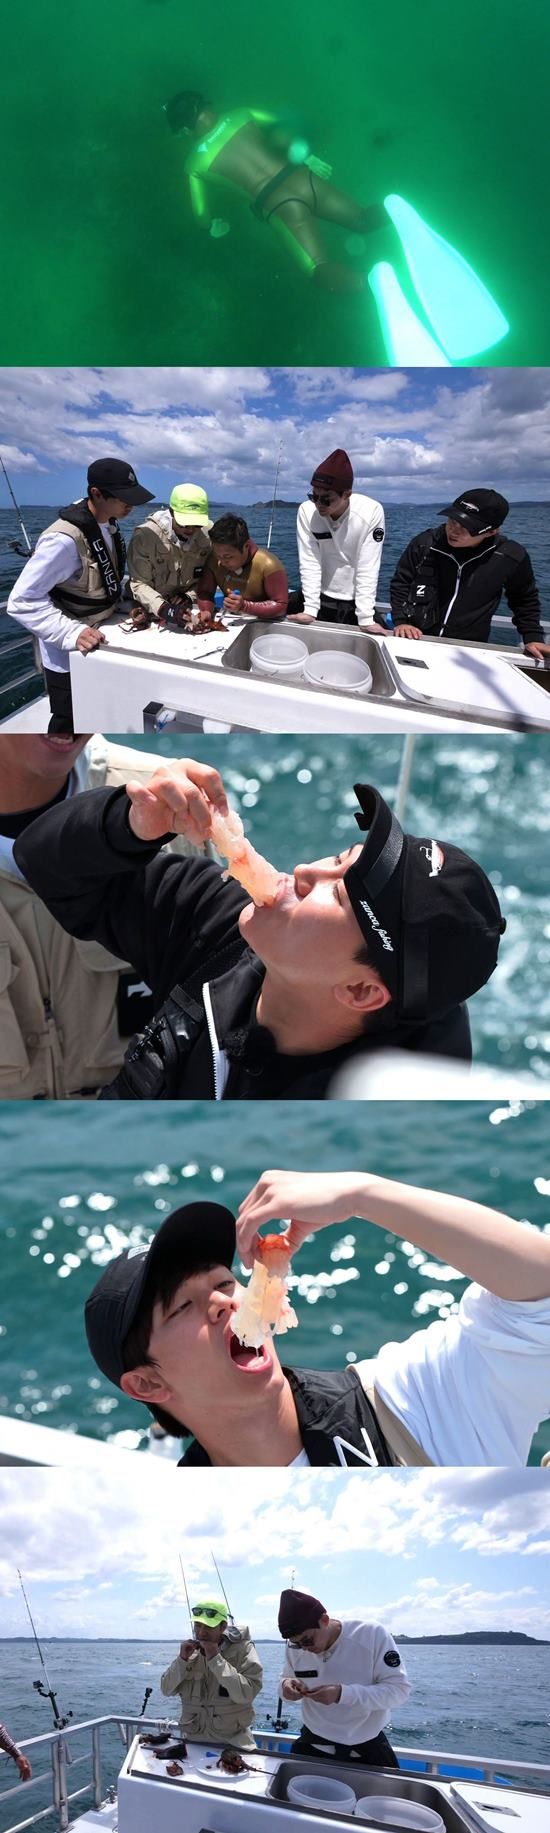 Comedian Kim Byung-man goes diving fishing in All The ButlersIn the SBS entertainment program All The Butlers broadcasted at 6:25 pm on the 15th, the diving fishing scene of Kim Byung-man will be revealed.Kim Byung-man and All The Butlers Lee Seung-gi, Lee Sang-yoon, Yuk Seong-jae and Yang Se-hyeong challenged fishing on a yacht in the middle of the New Zealand sea.In particular, Kim Byung-man caught the eye by diving fishing to catch the Lay fish that the members wanted so much.The expectation of the members has deepened because it is a big Lay fish that can feel the best taste of nature.Kim Byung-man then removed the bare-handed Lay fish directly to the skin, handed it to the members, and showed a caring aspect. The members admired the taste of Lay fish.In particular, Lee Sang-yoon and Lee Seung-gi are the back door that made the master happy by introducing meokbang (eating broadcast) which sucks up to the skin.The members are said to have had a lifetime struggle with King Fish, who met at the New Zealand Sea.Lee Sang-yoon, who was holding a fishing rod at the power of King Fish, which was a meter long, suffered a severe aftereffect.After a confrontation that made the hand sweat, I wonder if the members would have caught King Fish.